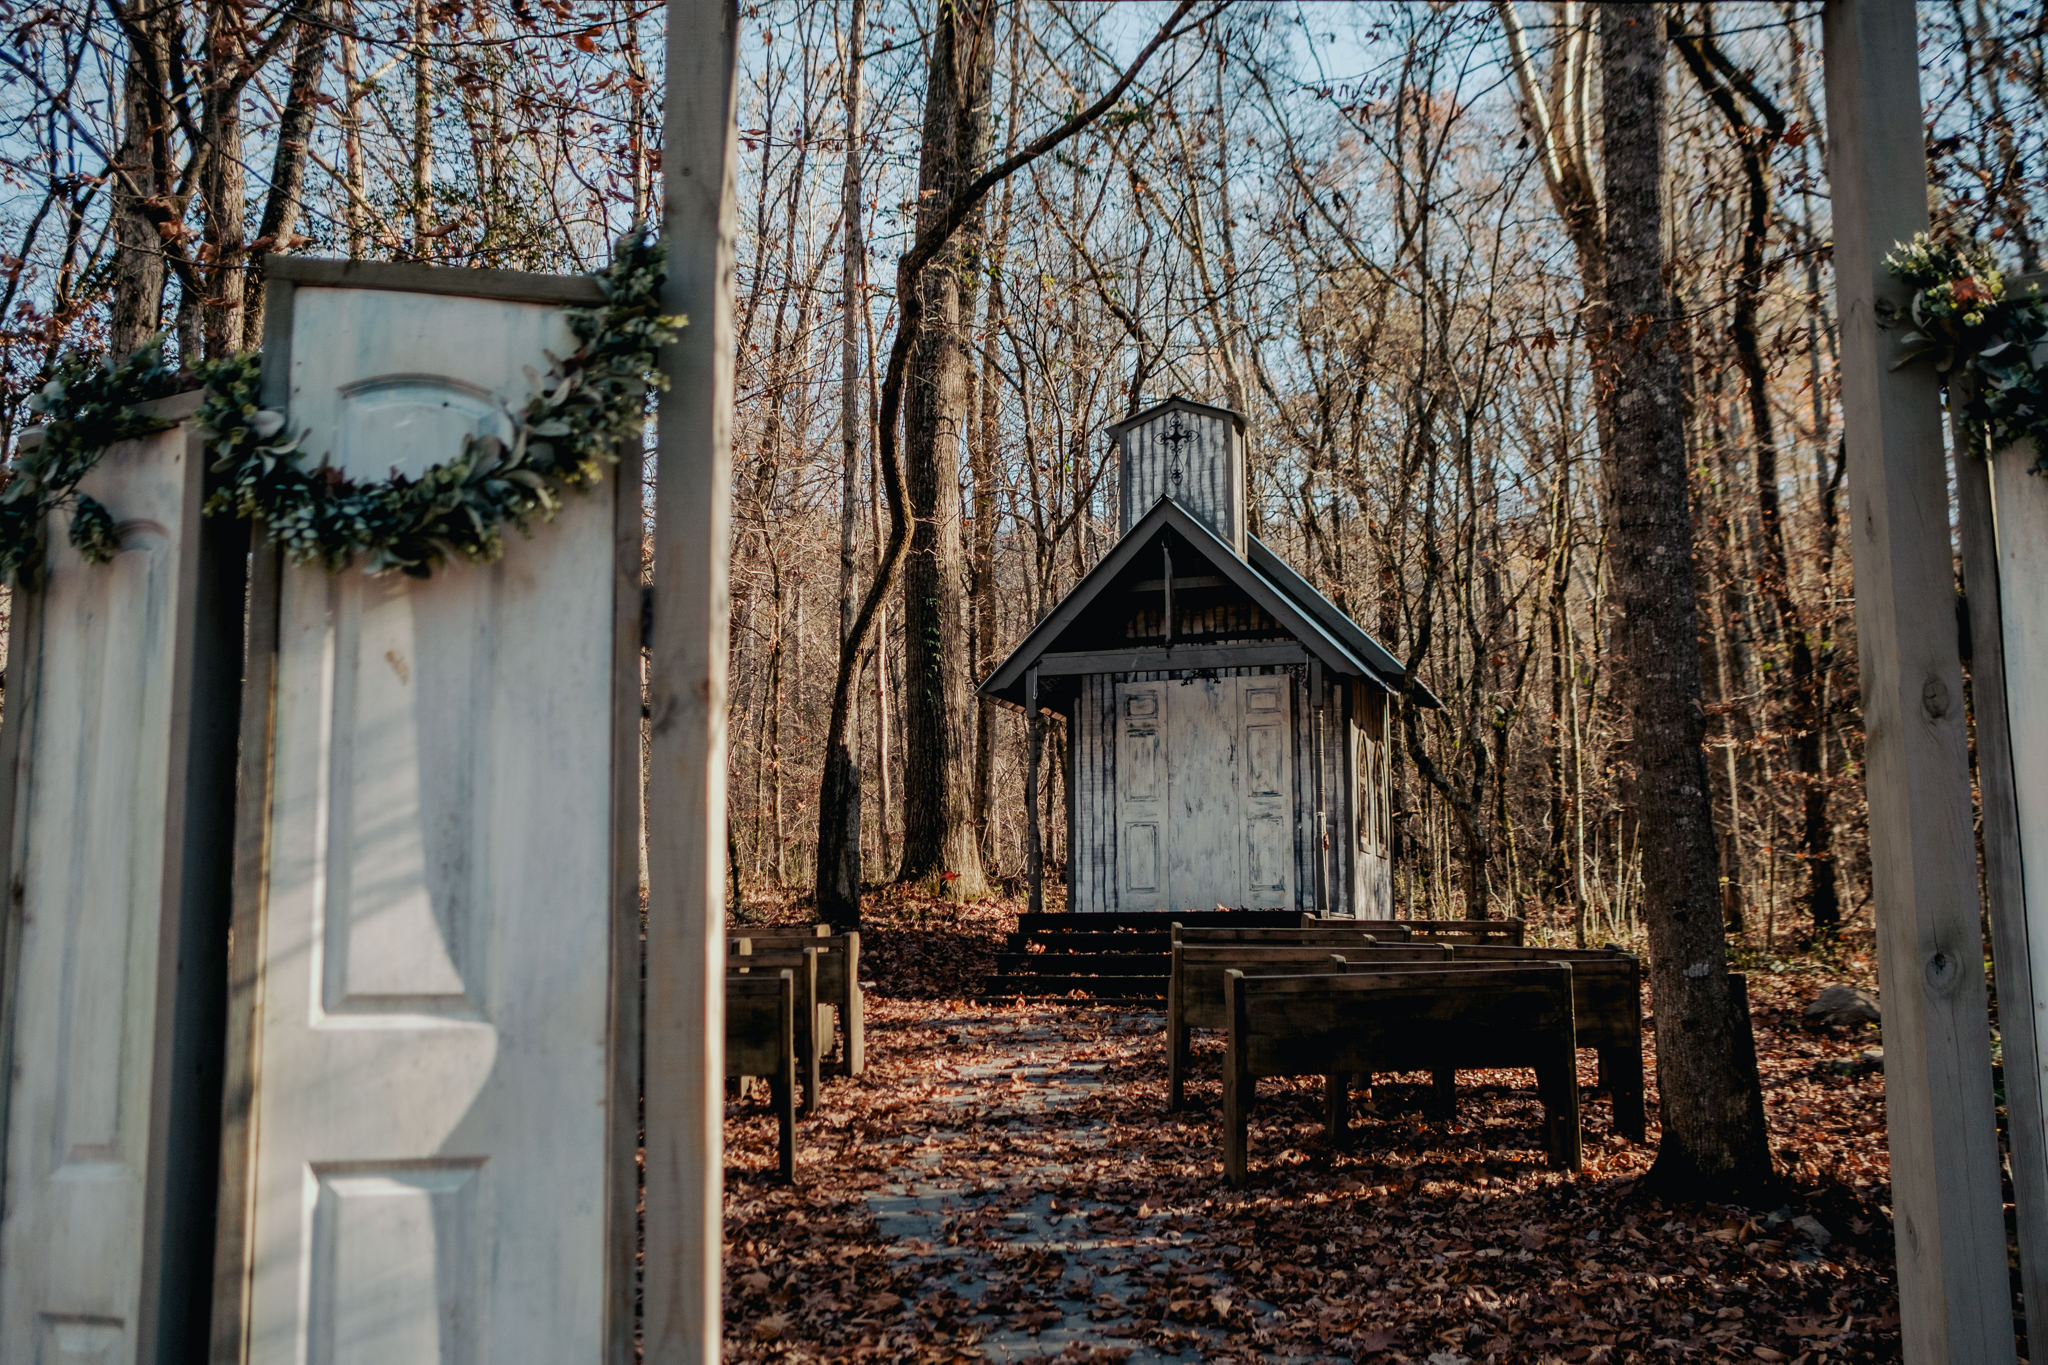 The iconic small chapel at the Chapel in the Hollow wedding venue in the fall